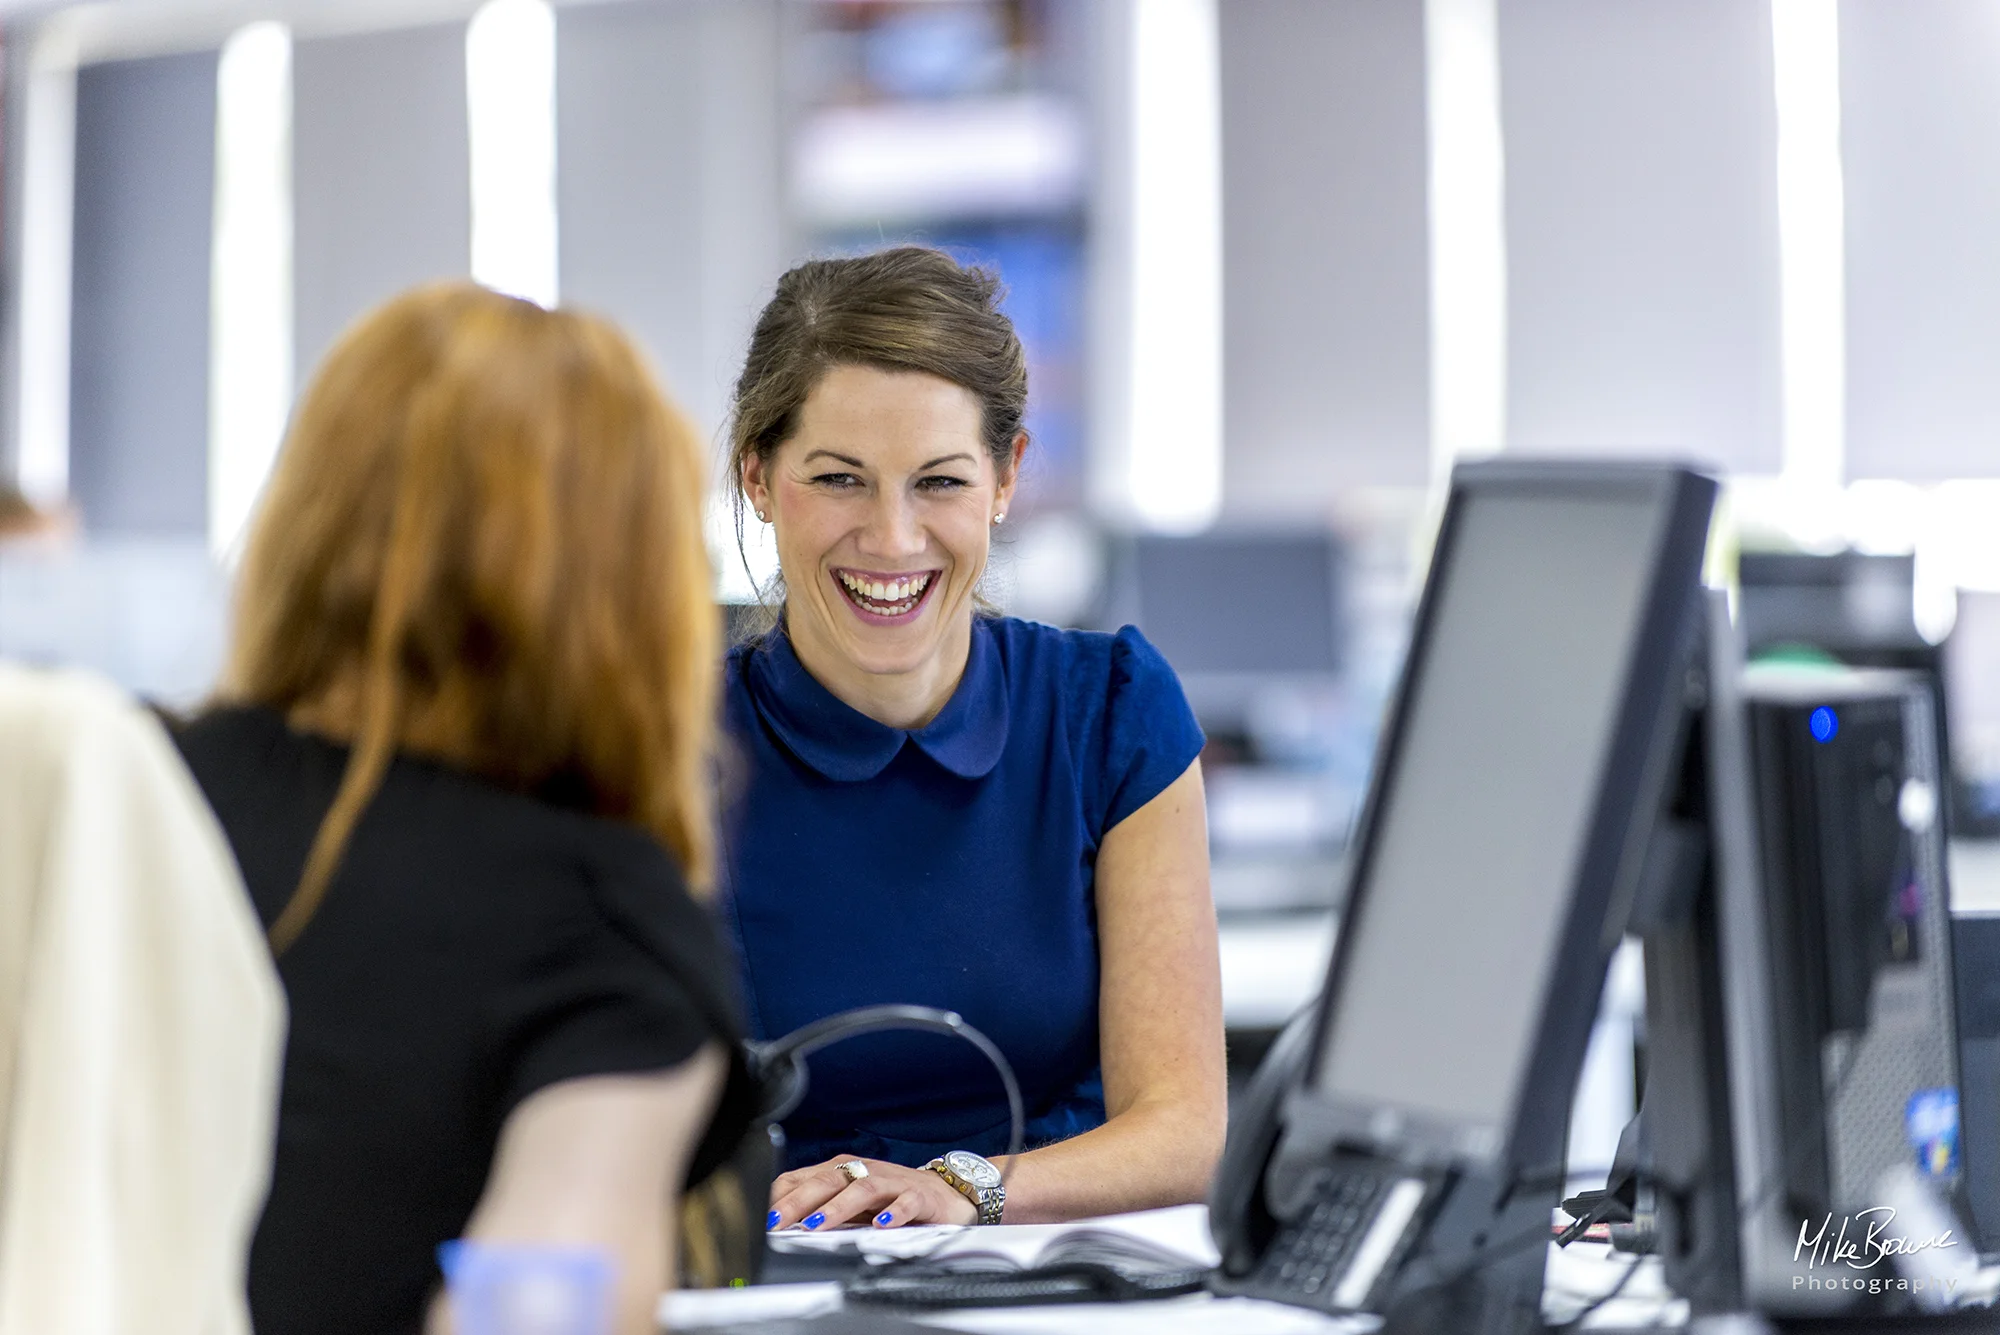 Woman wearing blue dress in an office environment in conversation to another woman with back to the camera